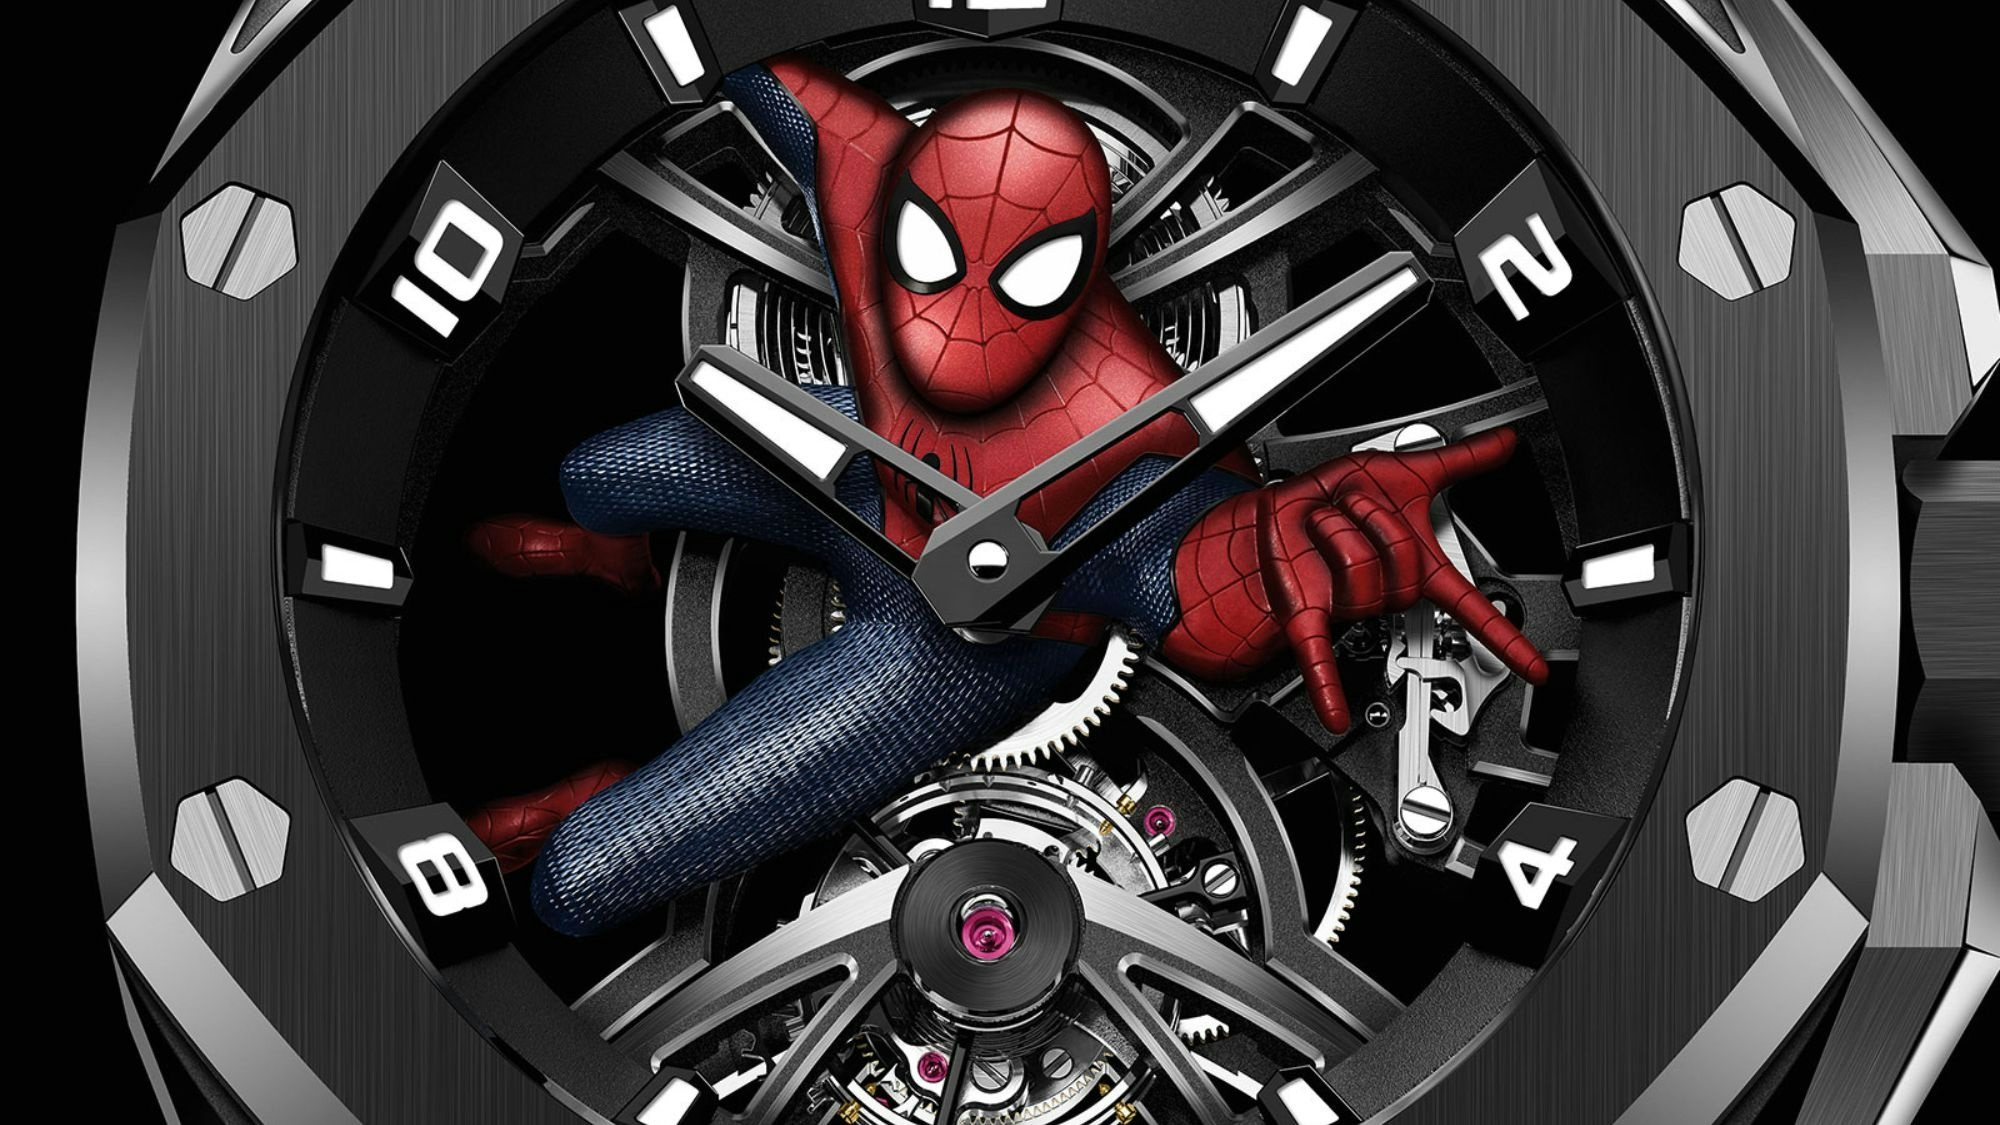 Following the first ever Marvel AP collaboration in 2021, the Spider-Man timepiece has attracted even more hype. Photo: Audemars Piguet